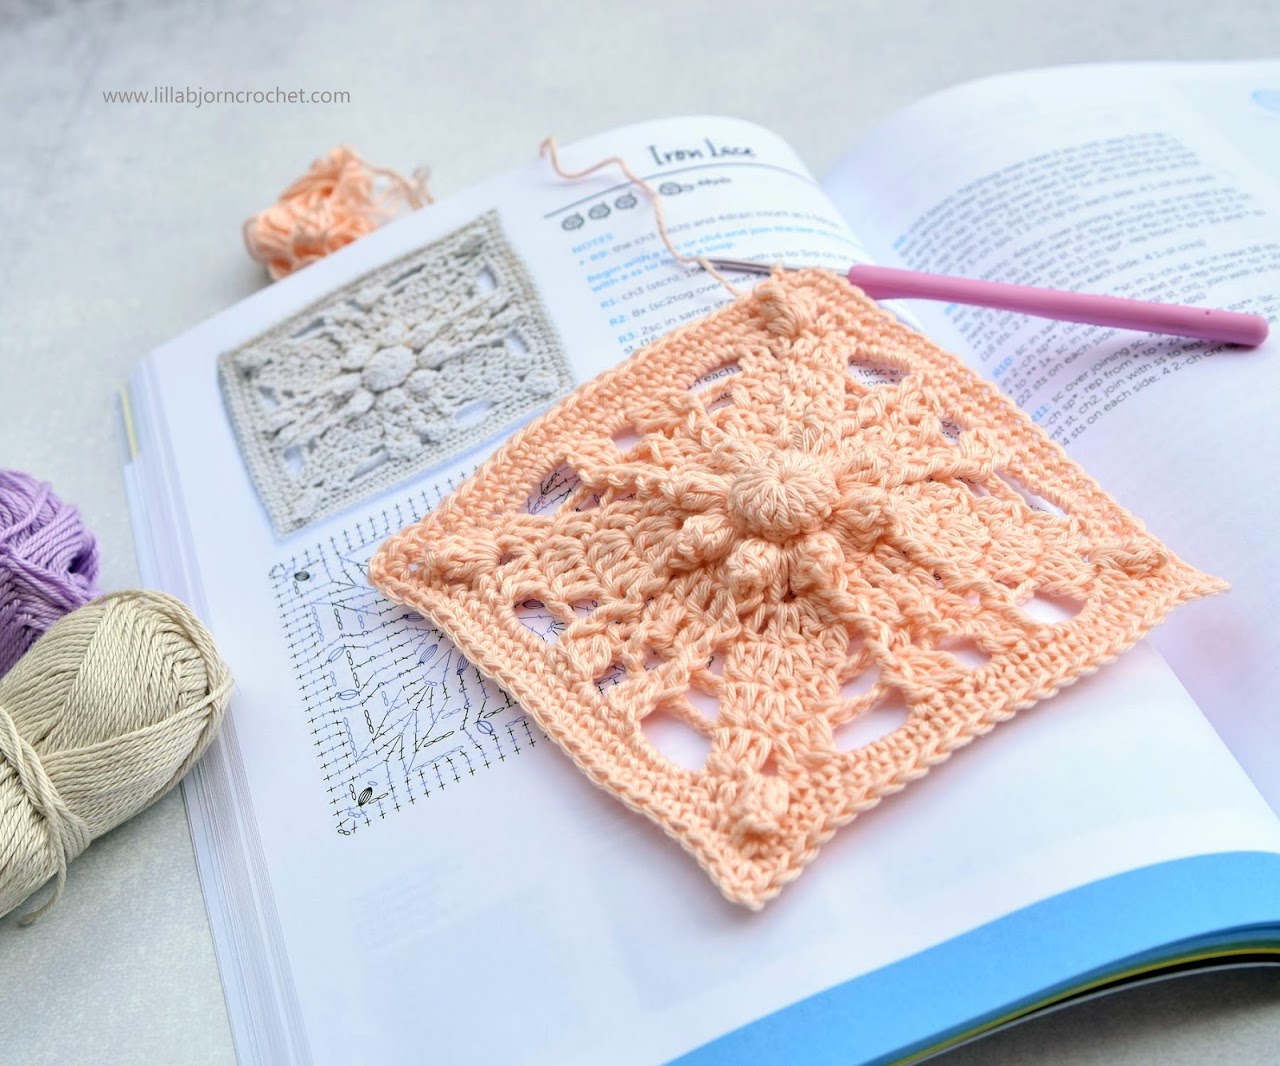 Granny Square Flair book by Shelley Husband of @Spincushions. Reviewed by www.lillabjorncrochet.com